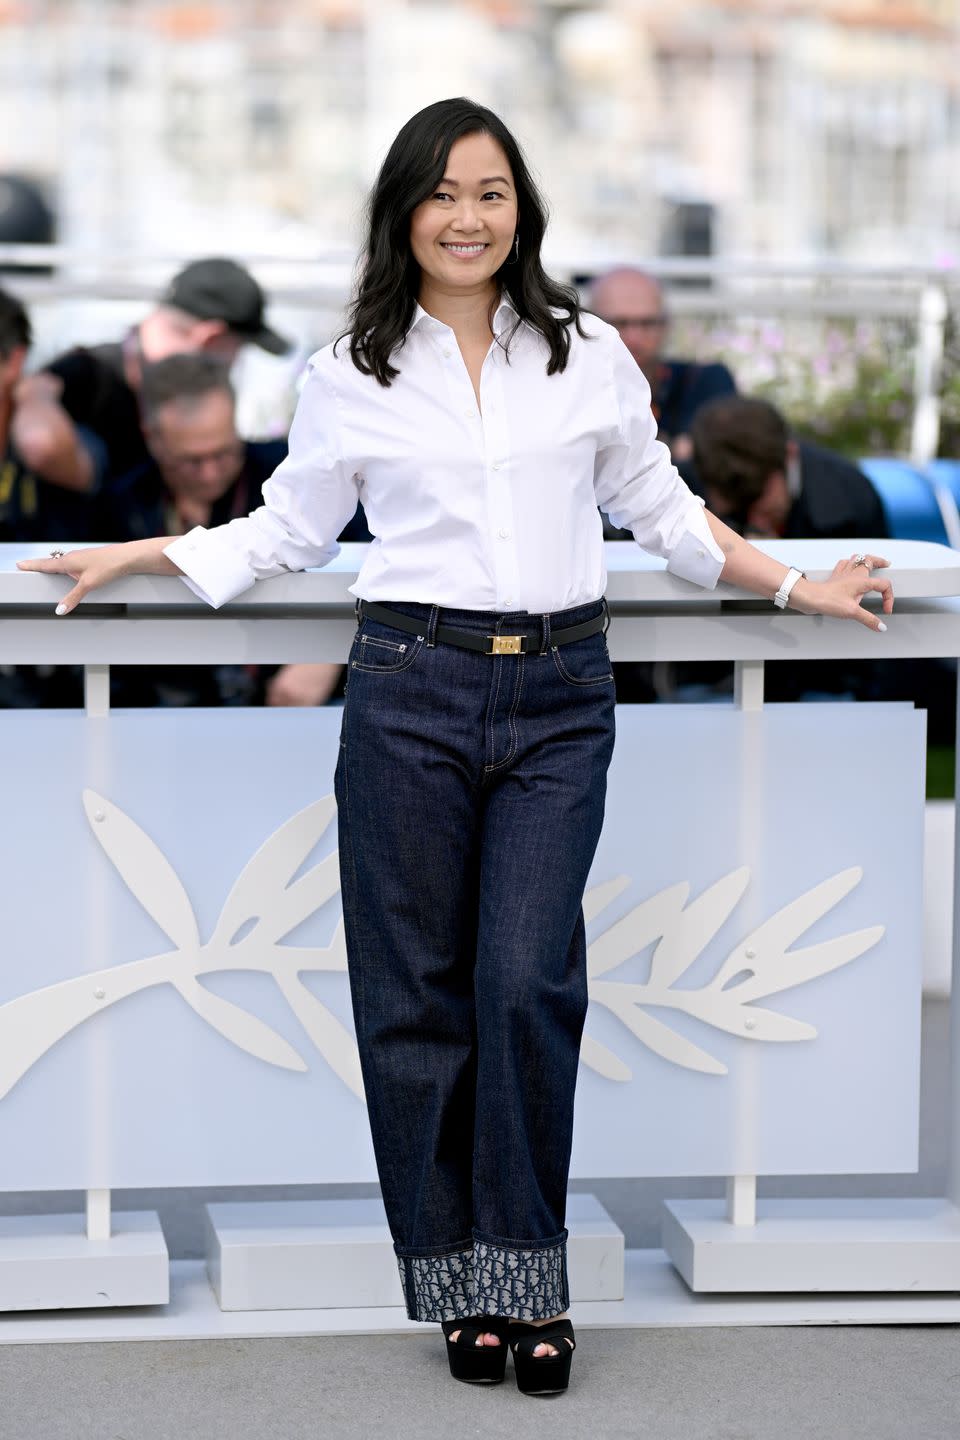 hong chau attends the kinds of kindness photocall